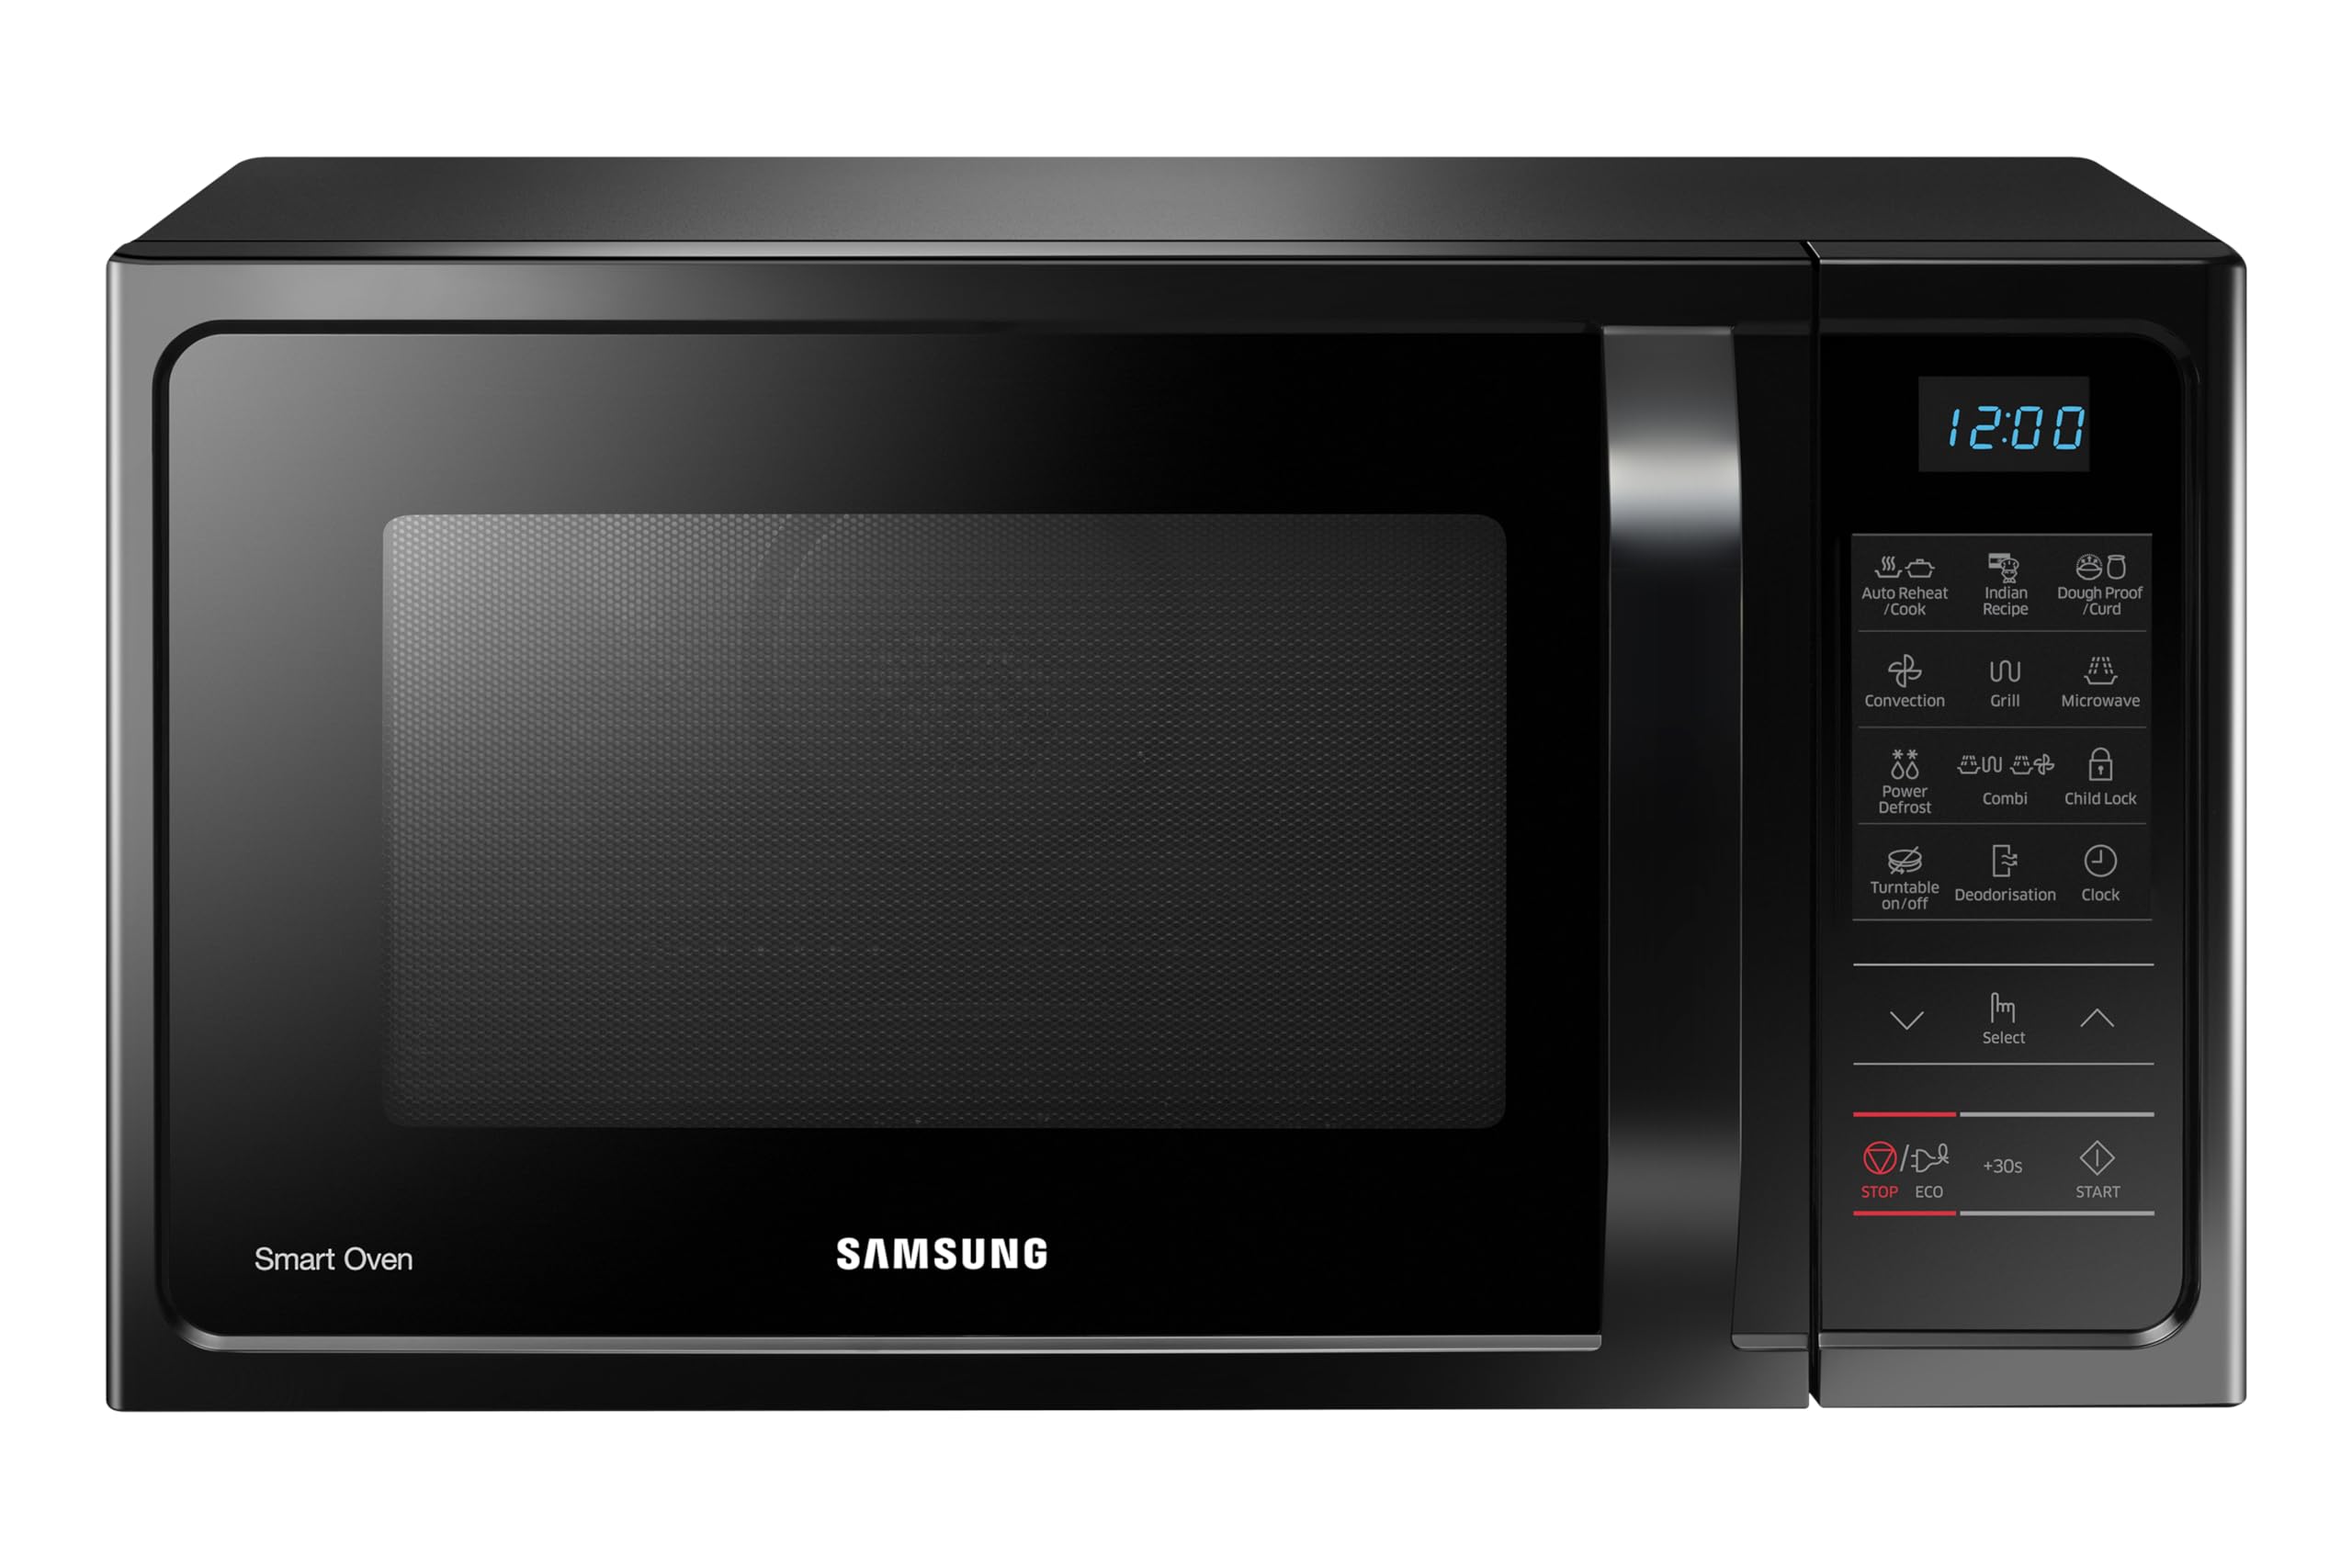 How To Fix The Error Code E-28 For Samsung Convection Oven